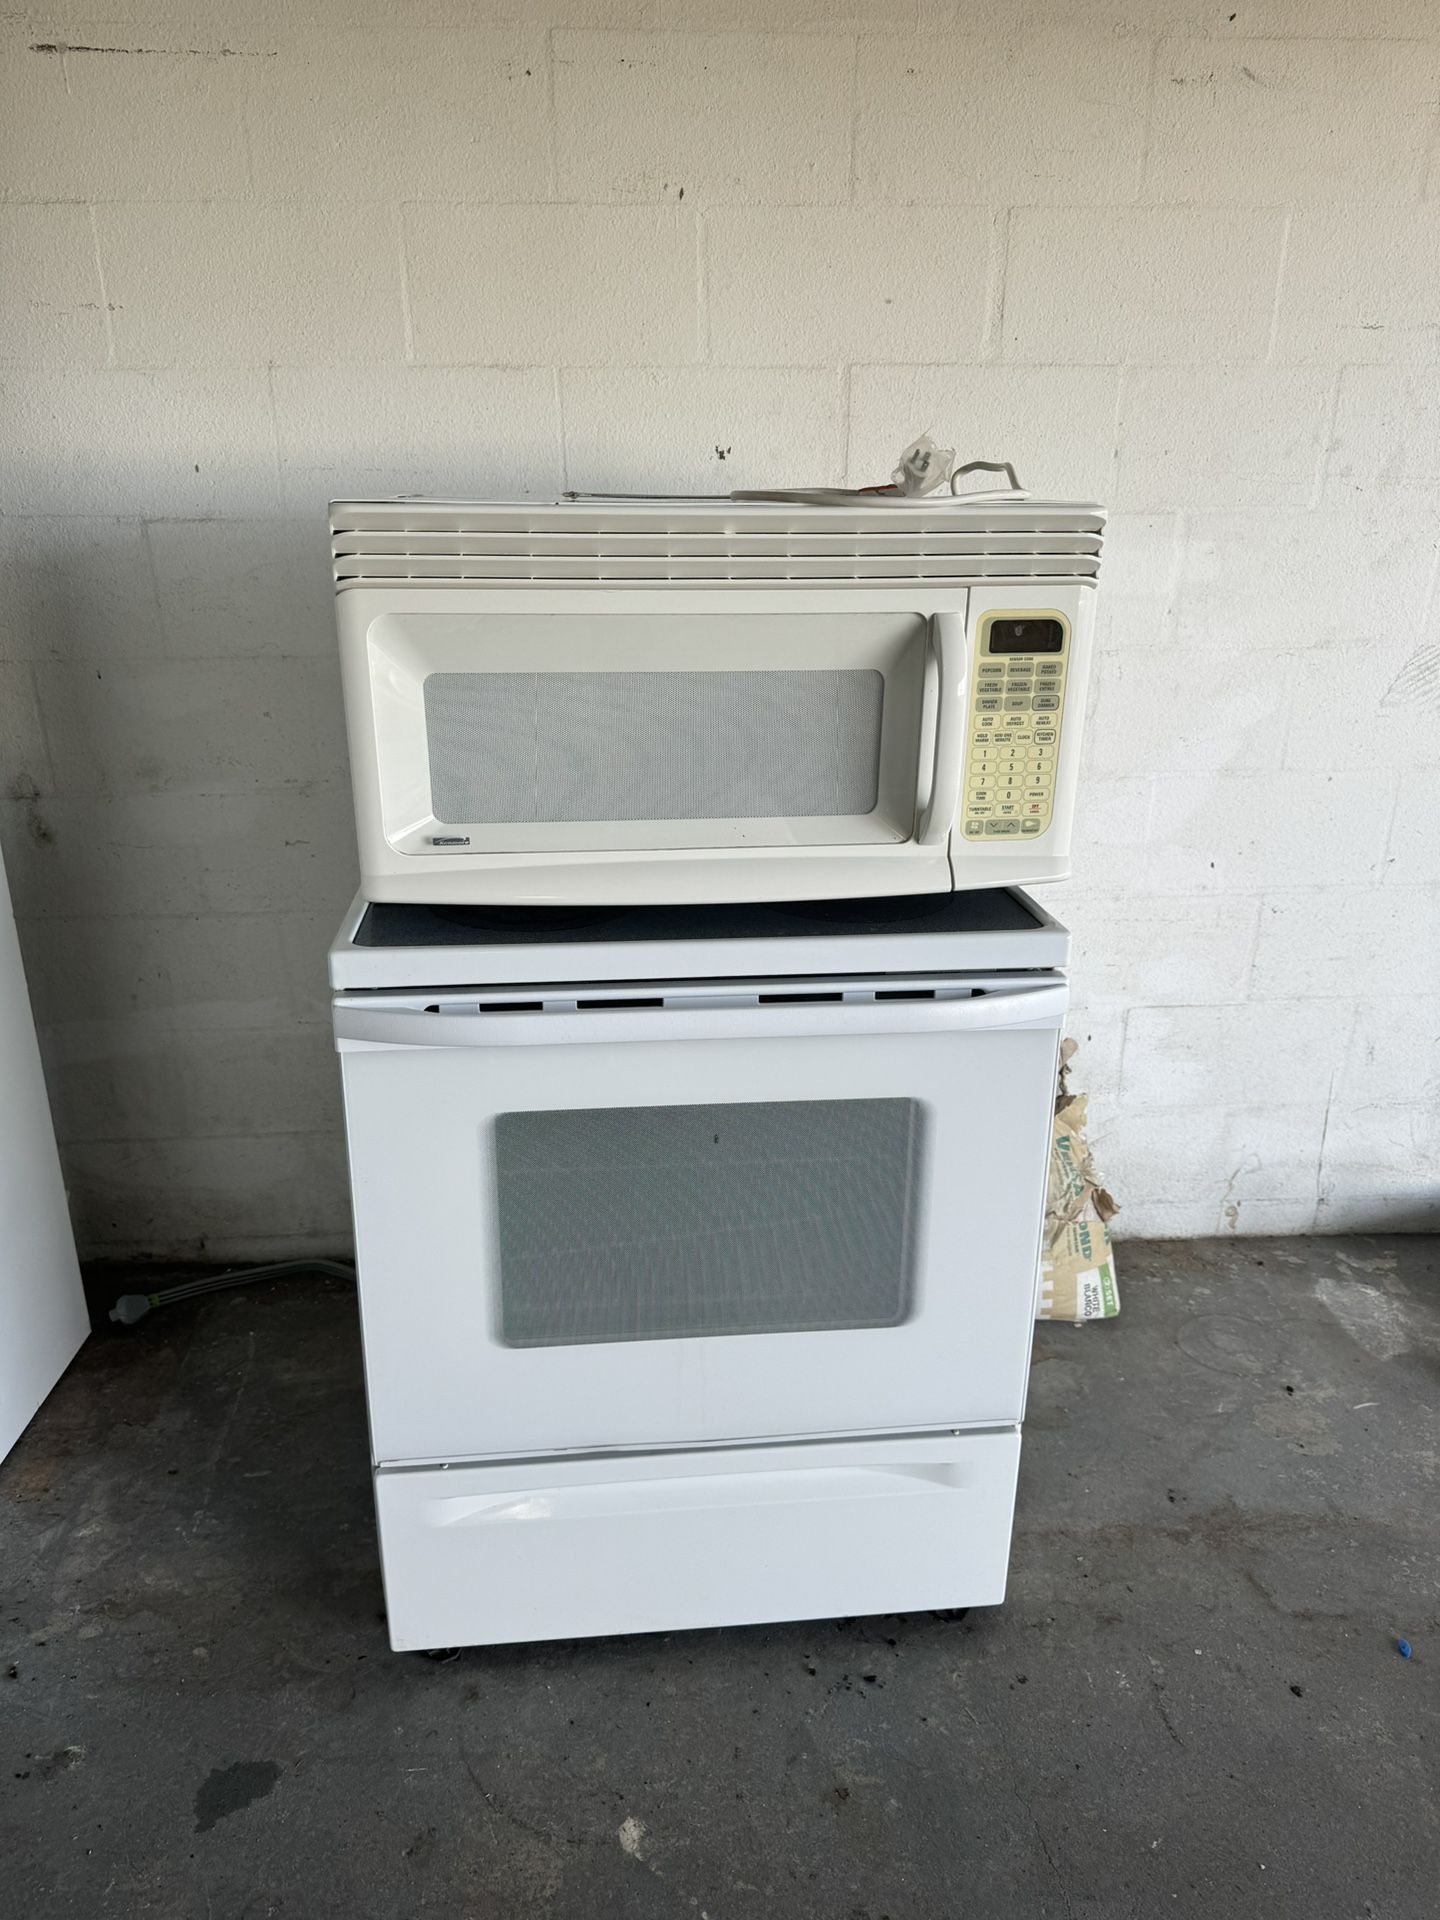 Oven And microwave 